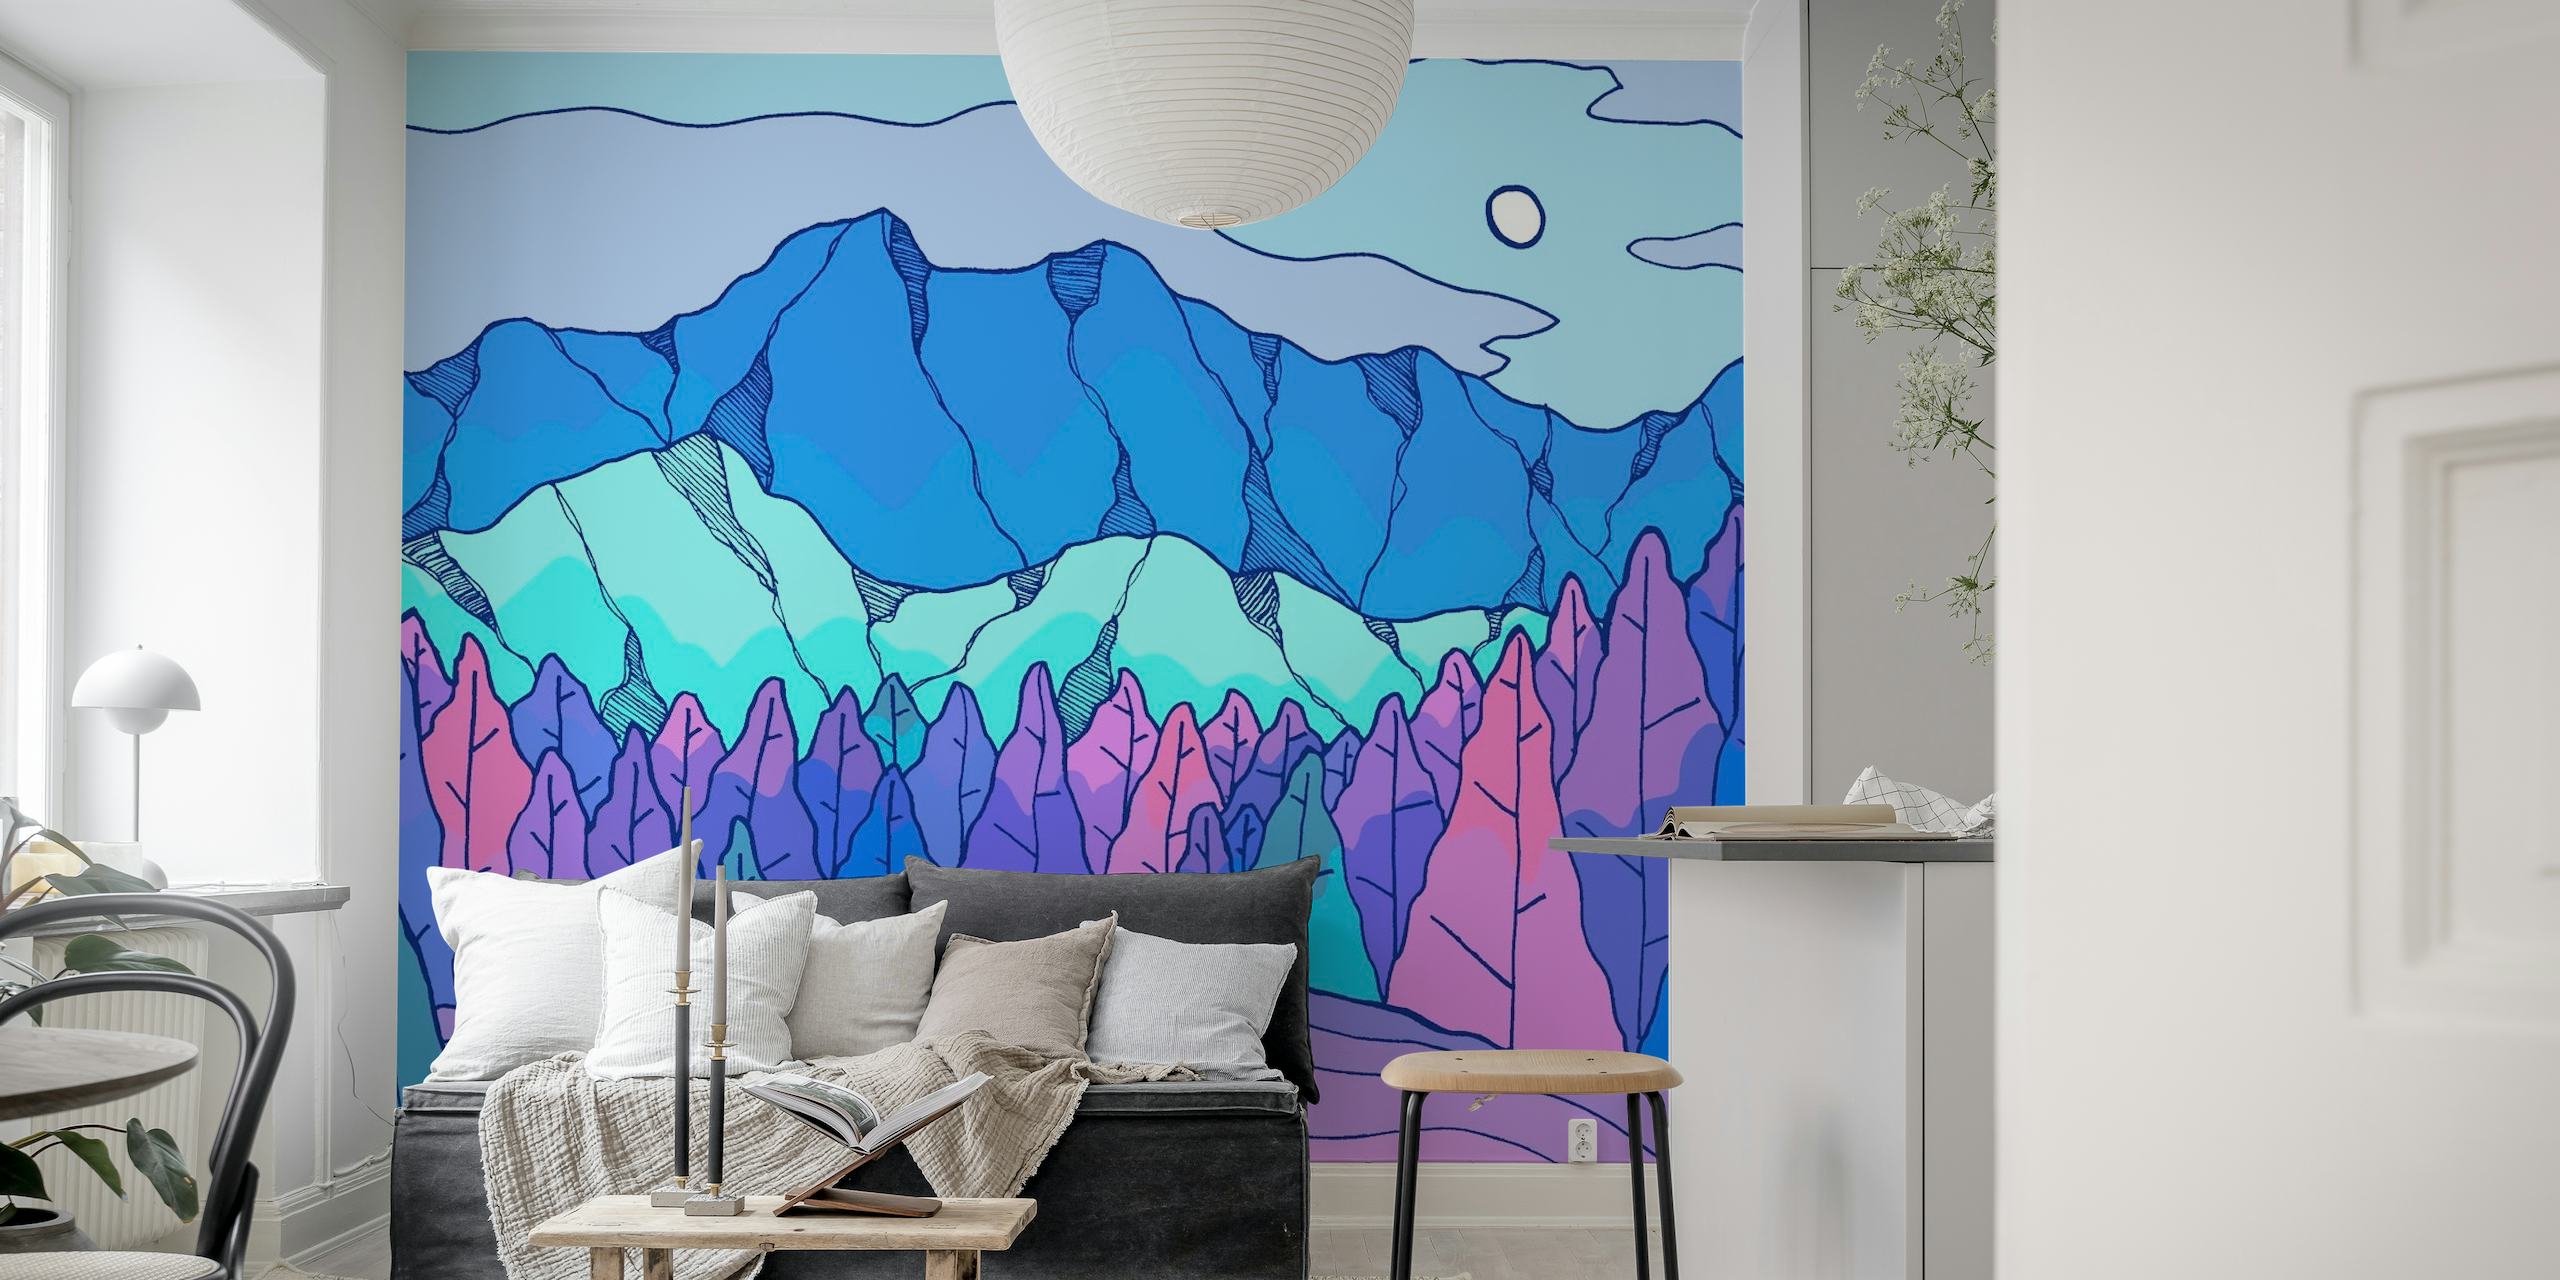 Stylized neon-colored river flowing through a geometric mountain landscape under a pale moon wall mural